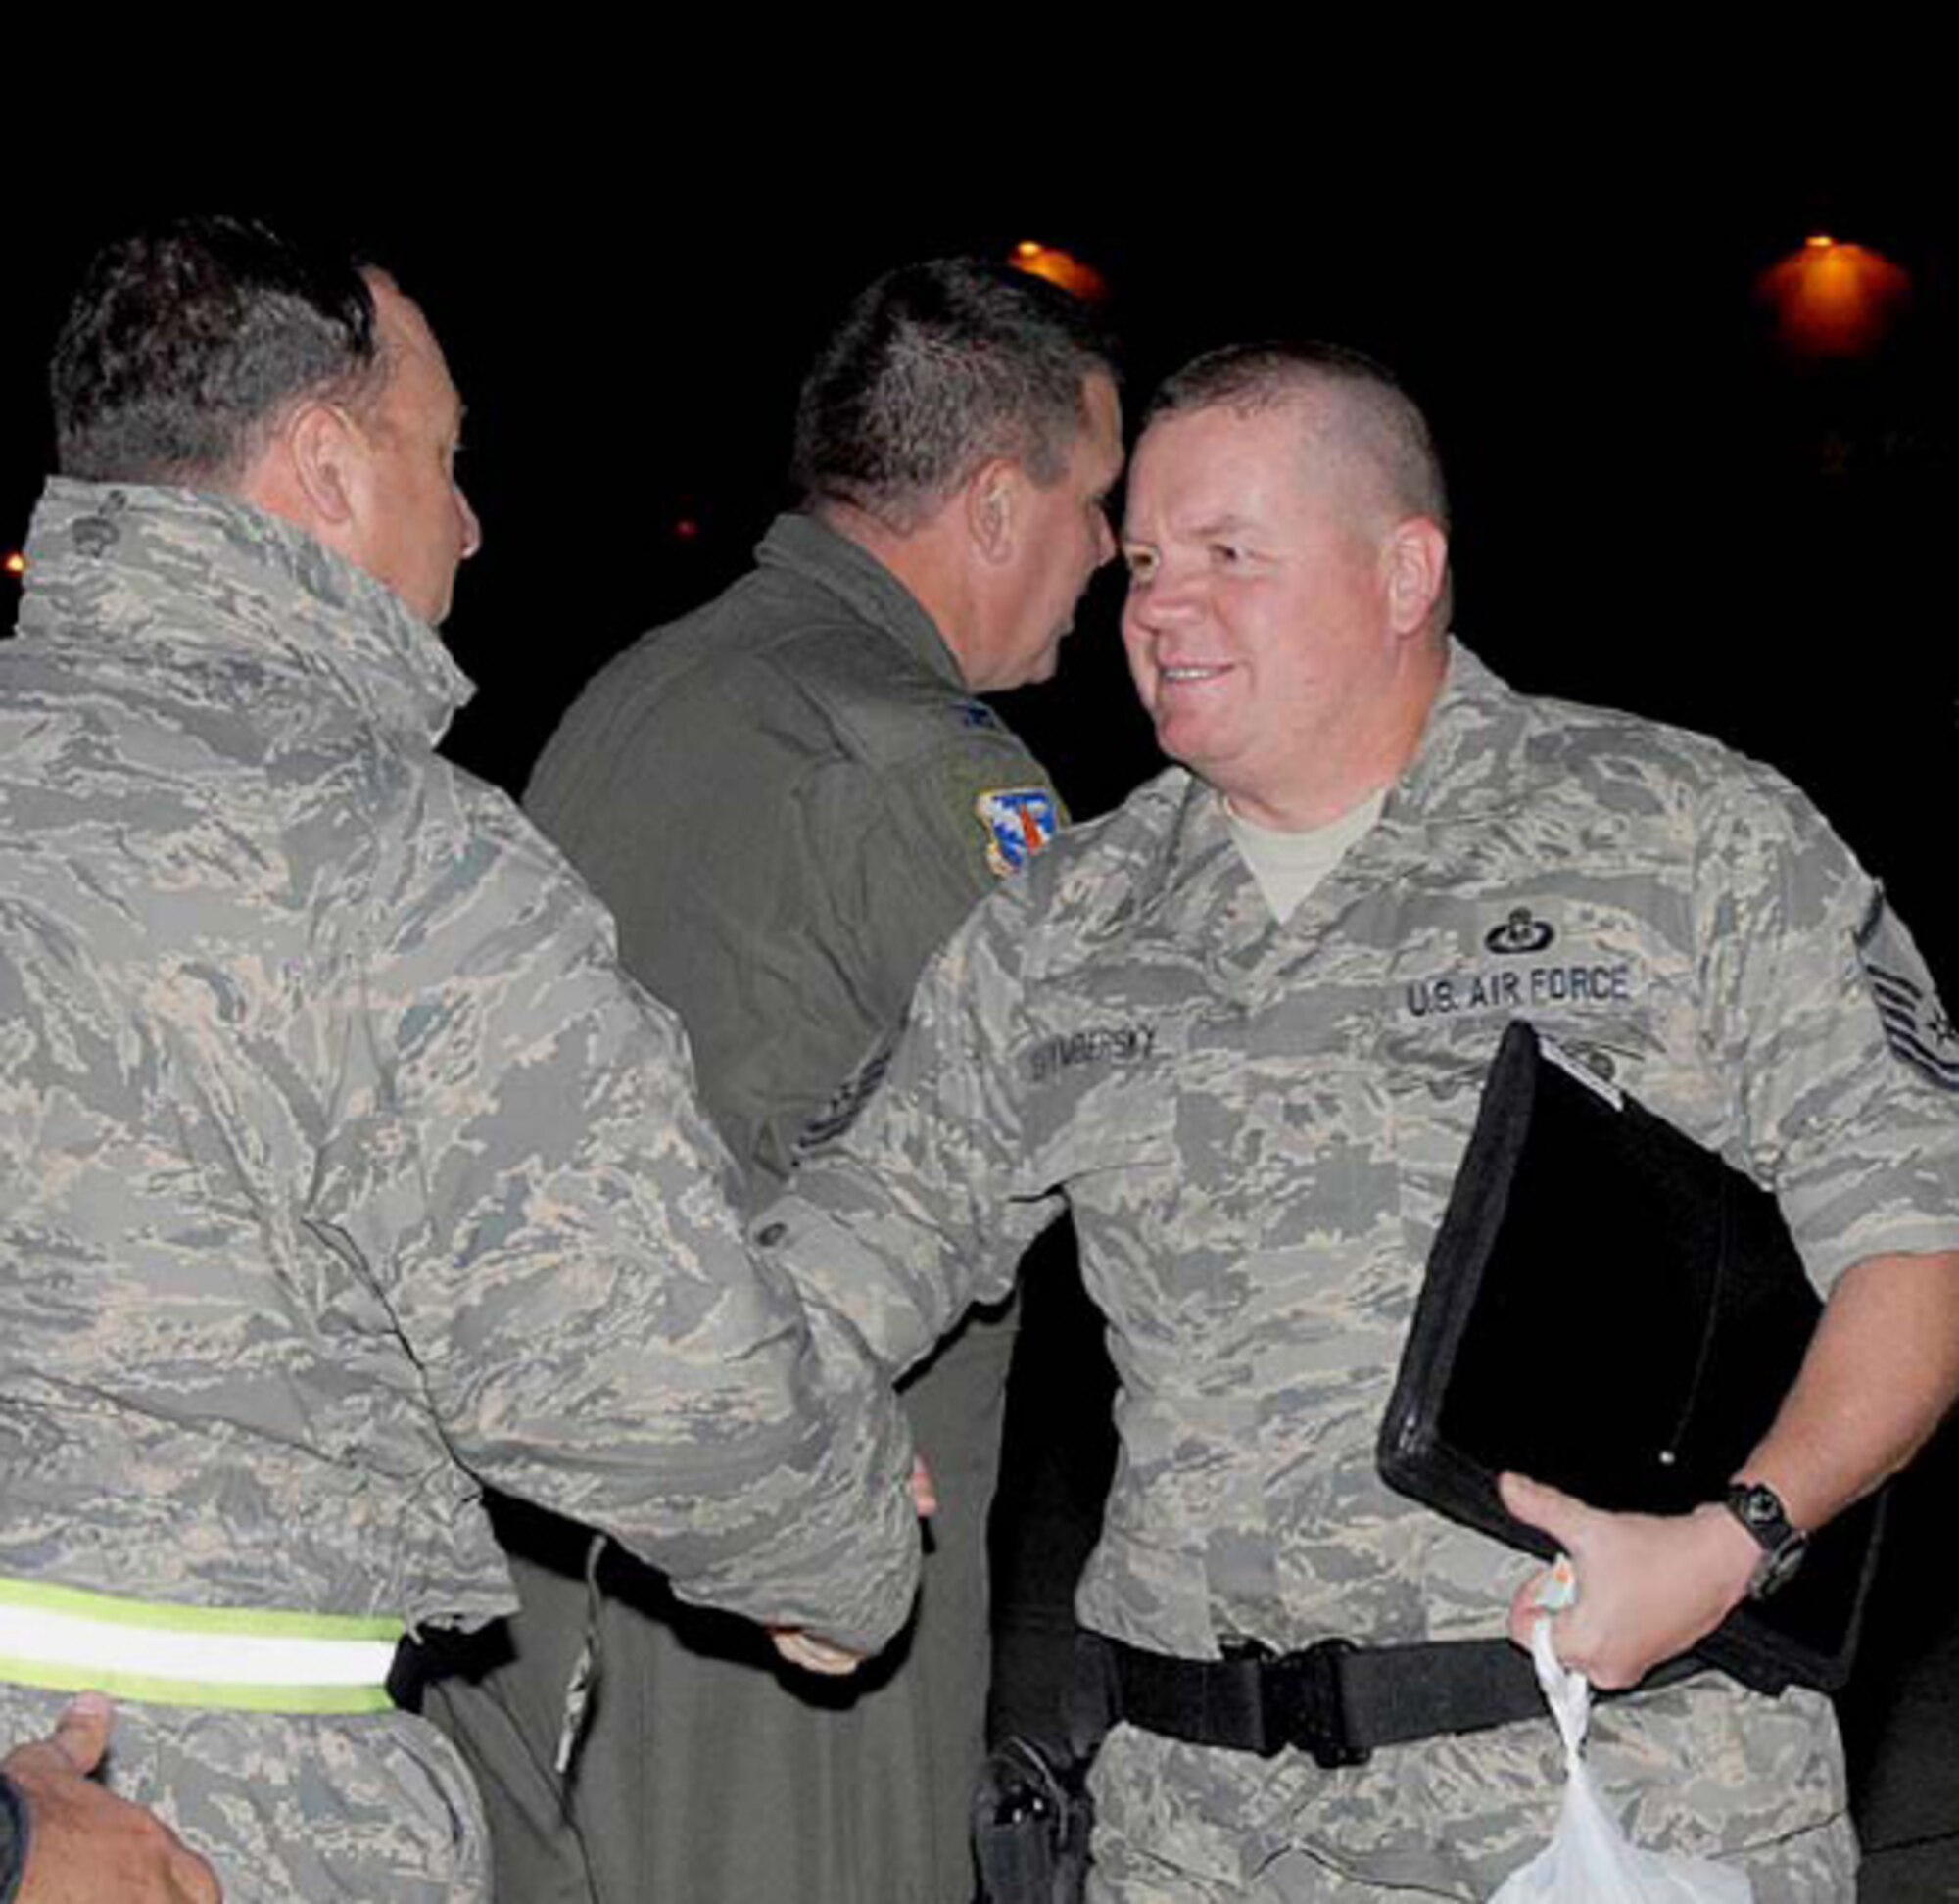 Master Sgt. Dan Svymbersky, an Aircrew Flight Equipment Specialist, shakes the hand of Maintenance Group Commander Lt. Col. Bart Welker before boarding for a flight to the Middle East as part of the Air Expeditionary Force (AEF) contingent that departed Peoria early morning October 5. Photo by Tech. Sgt. Todd Pendleton